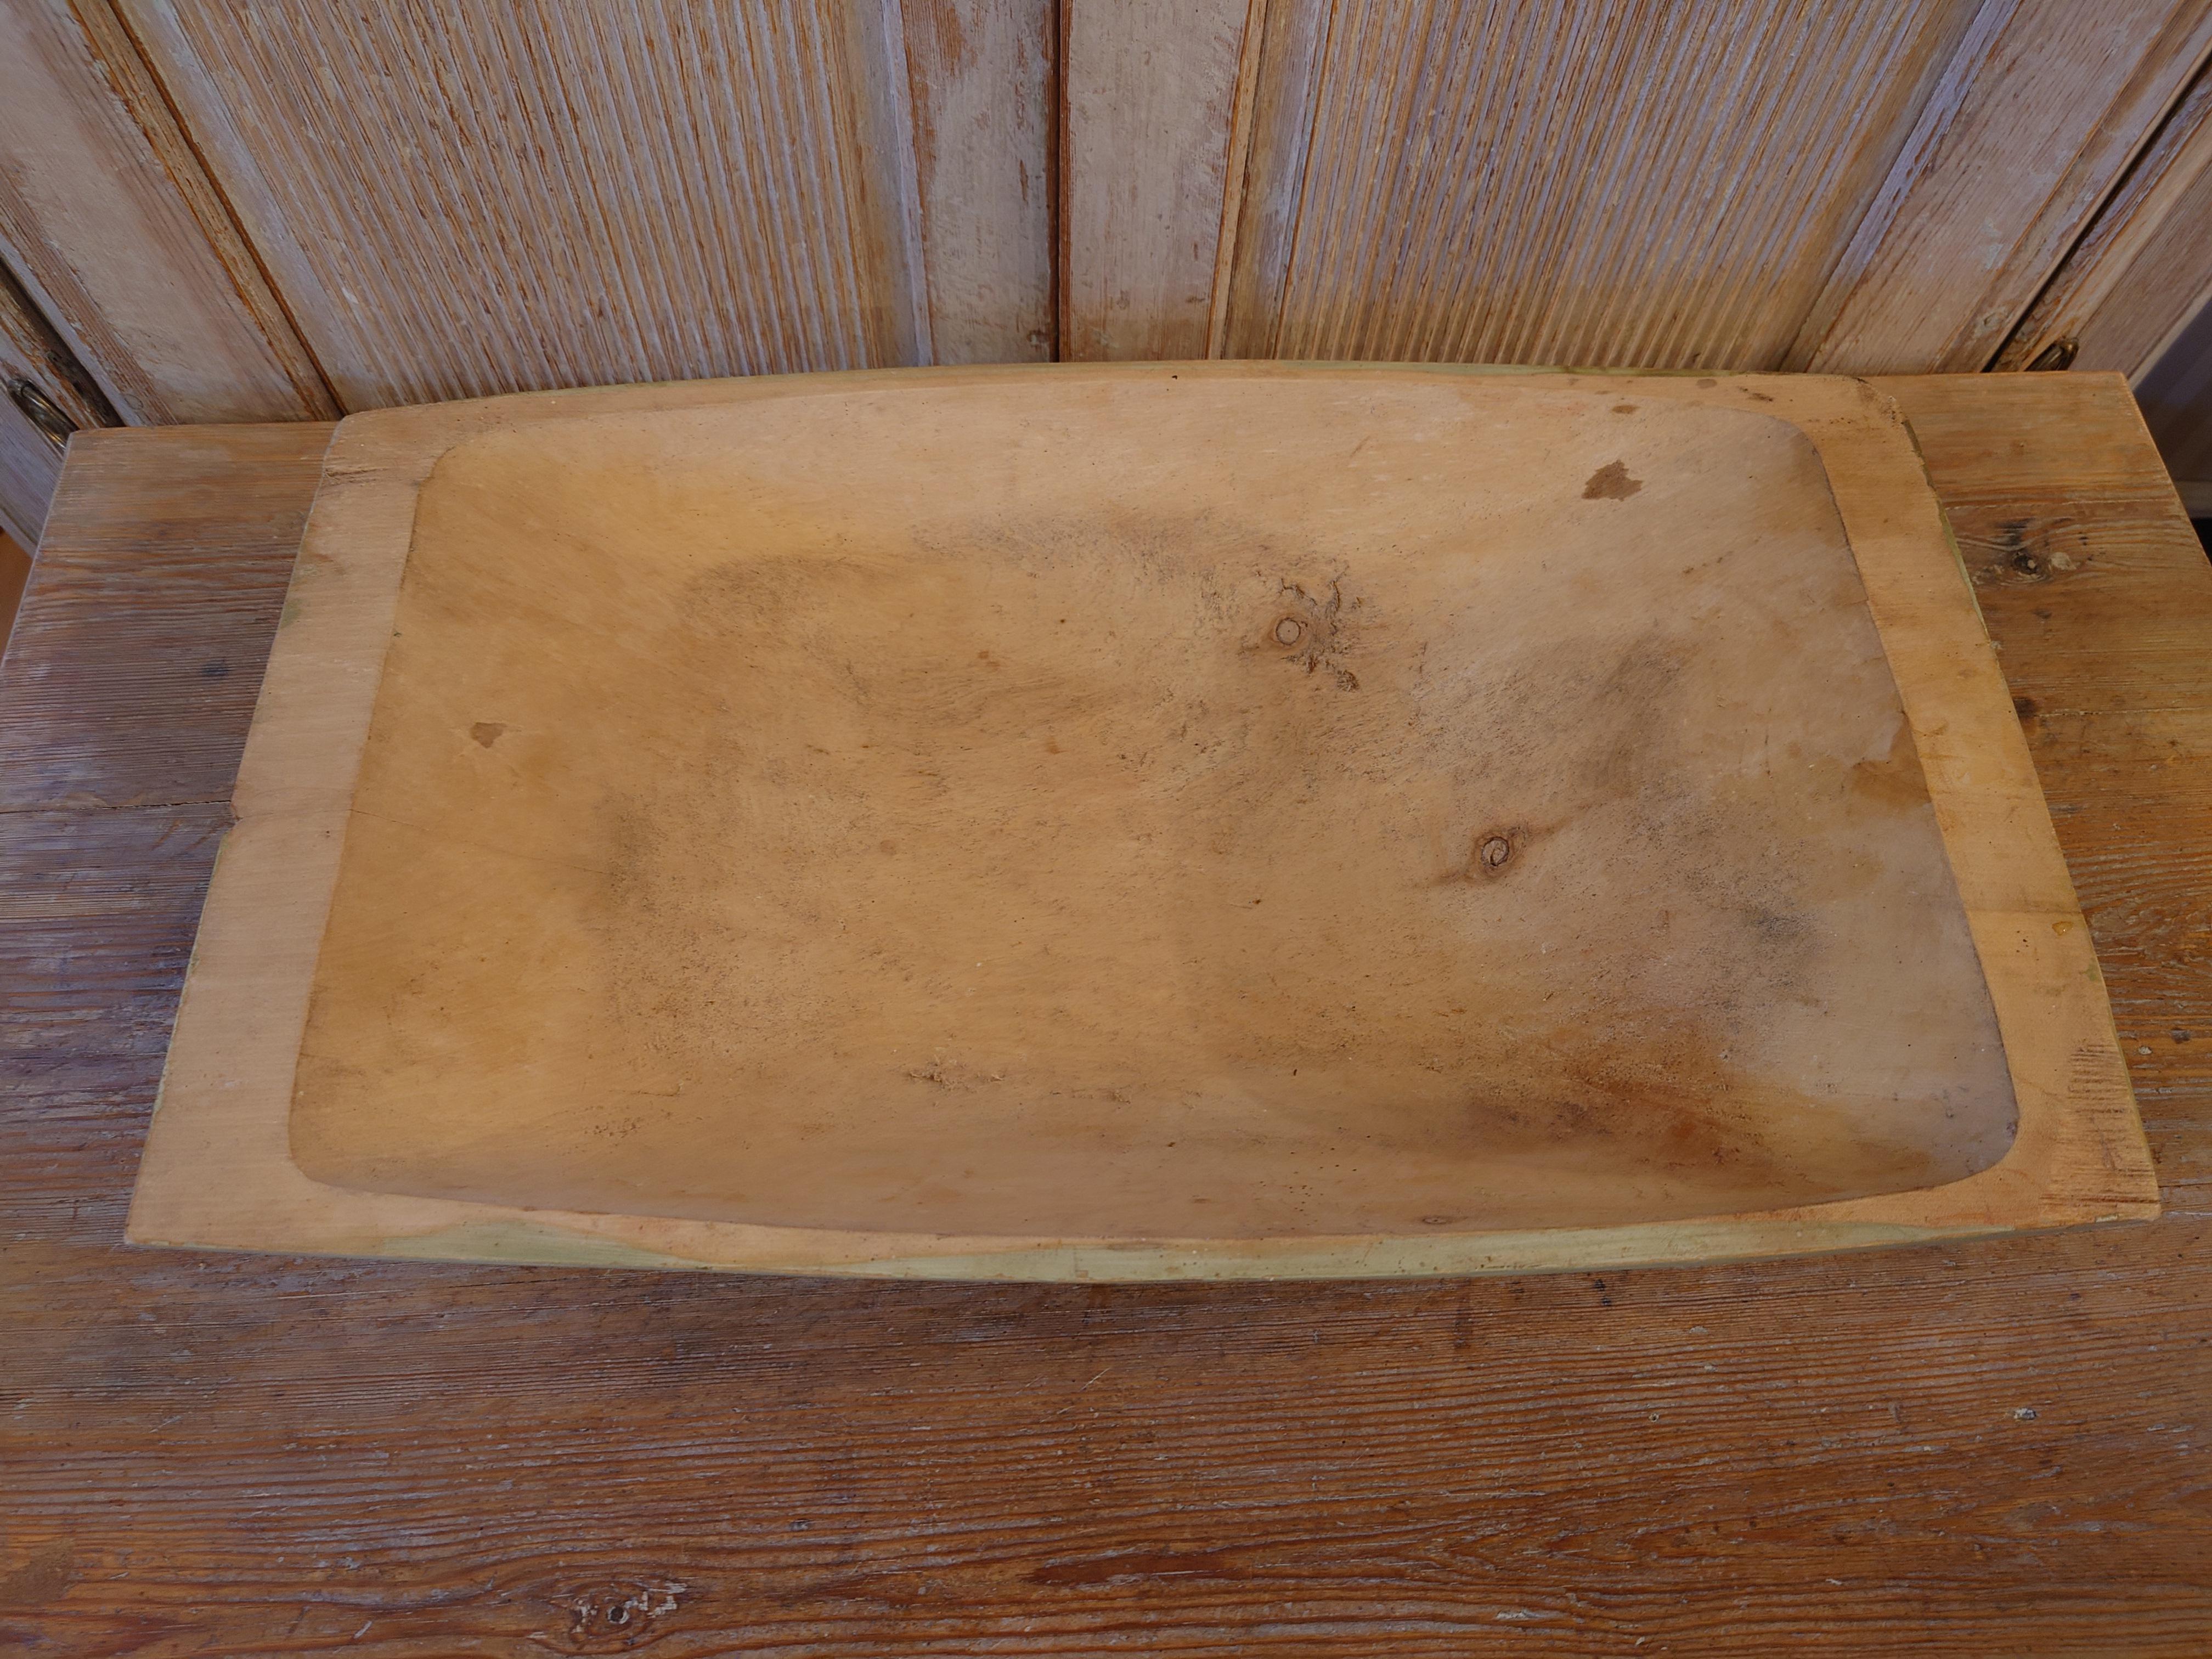 Hand-Carved 19th Century Swedish Folk Art Wooden Trough/ Serving Bowl with Original Paint For Sale